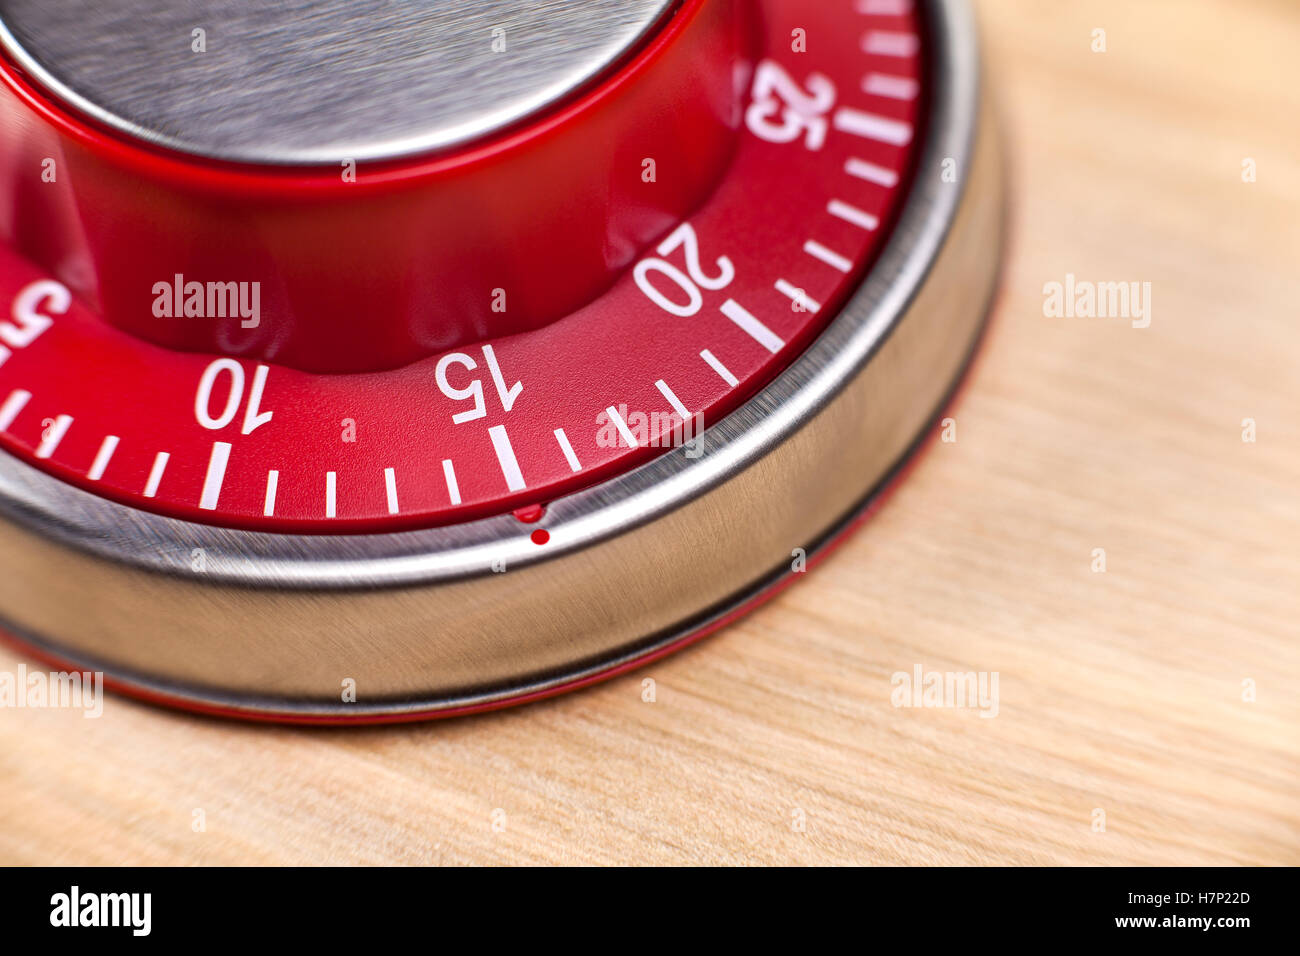 Macro view of a red kitchen egg timer showing 15 minutes on wooden background Stock Photo